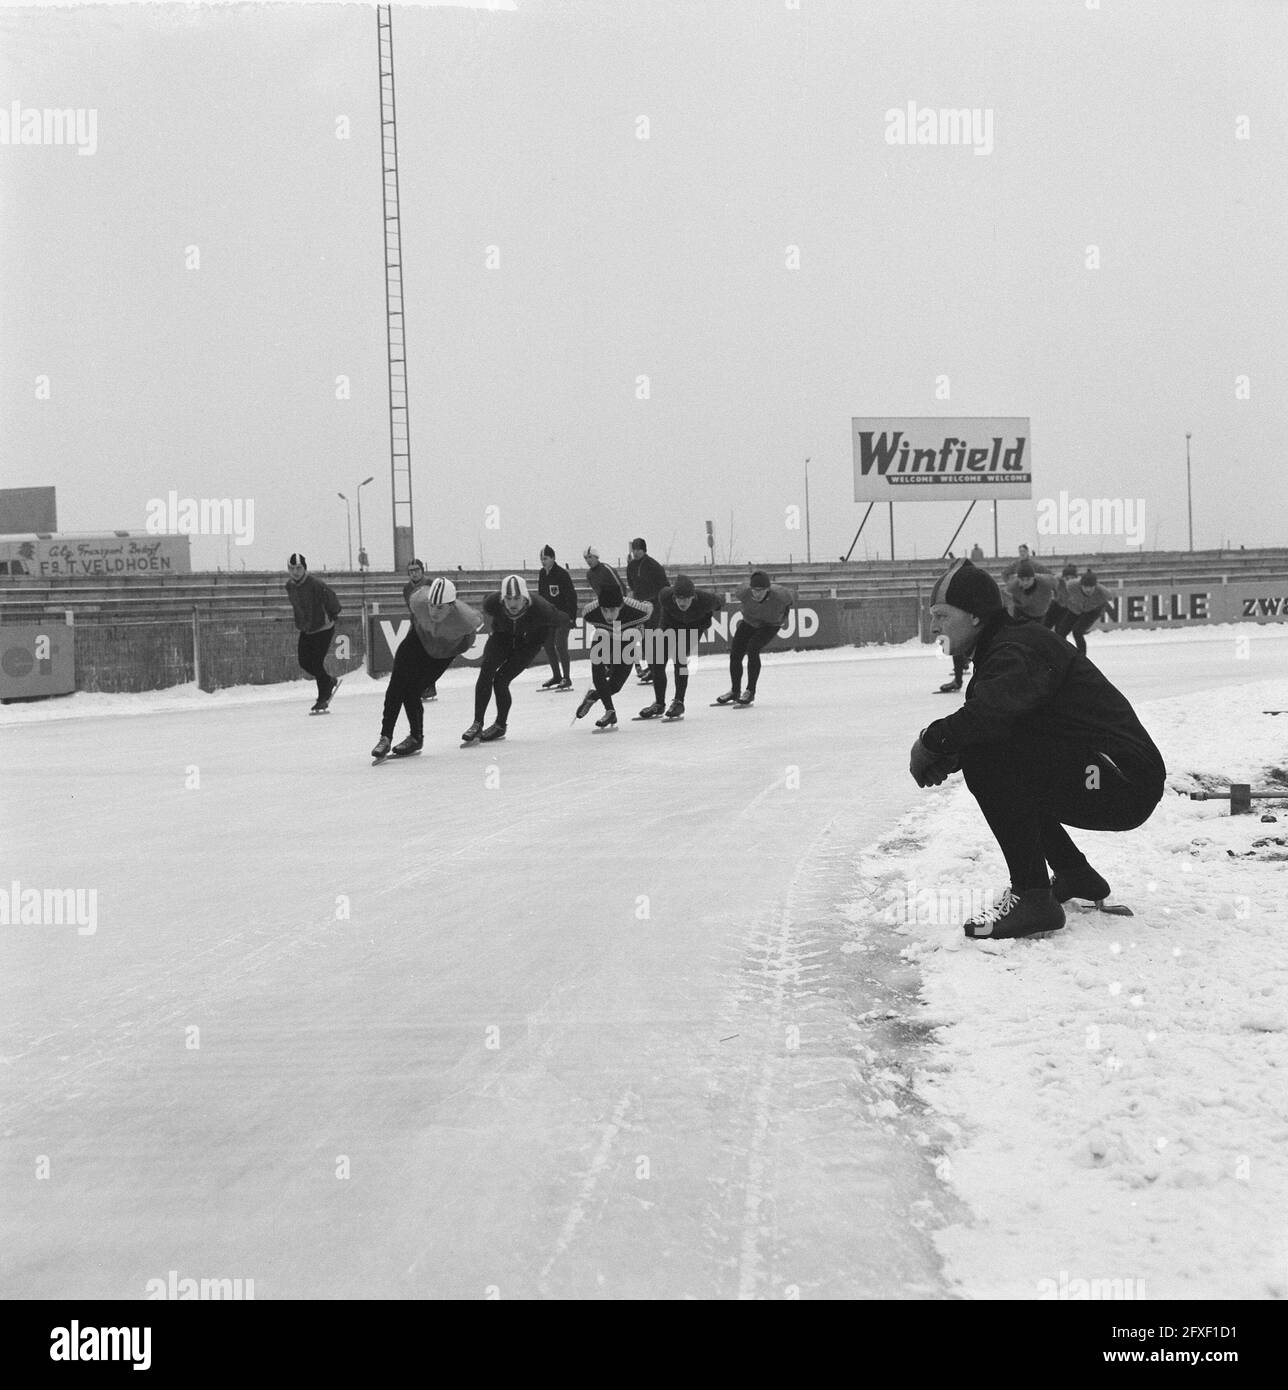 Training Dutch Core Team on Deventer artificial ice rink. Trainer Lamberts gives instructions to Van der Grift, Kieviet, Heyst, Liebrechts, Nottet and Renes, December 12, 1963, SCHATSEN, instructions, sports, The Netherlands, 20th century press agency photo, news to remember, documentary, historic photography 1945-1990, visual stories, human history of the Twentieth Century, capturing moments in time Stock Photo